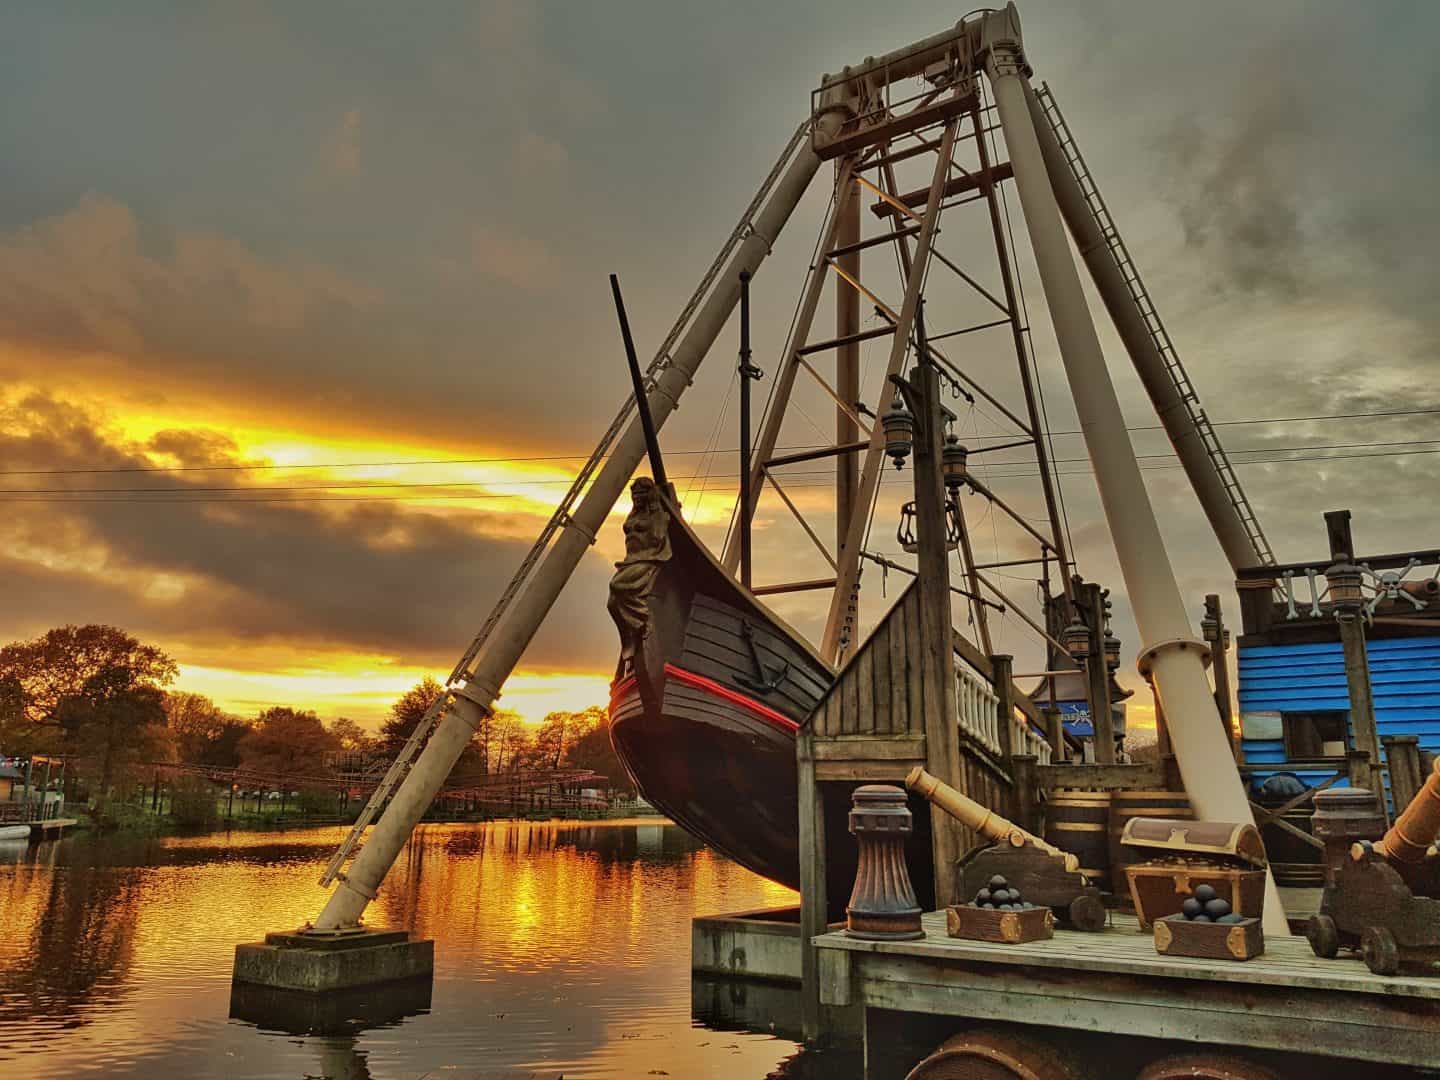 Sunset over the Pirate Ship one of the things to do at Drayton Manor Park Staffordshire half term February 2023